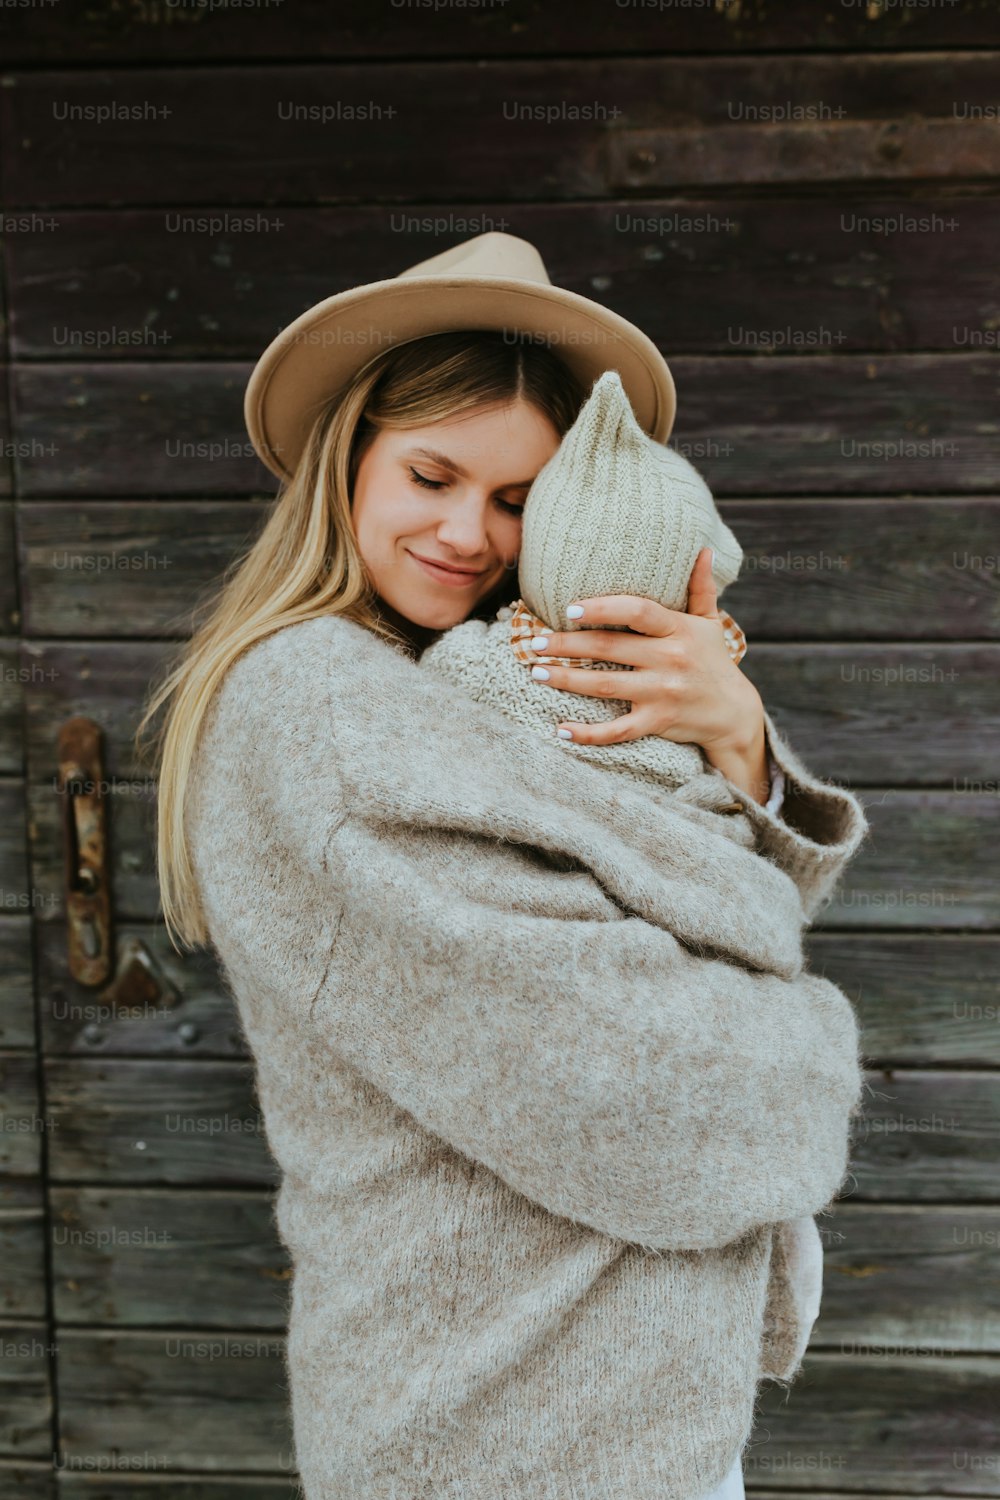 a woman wearing a hat and a sweater hugging her